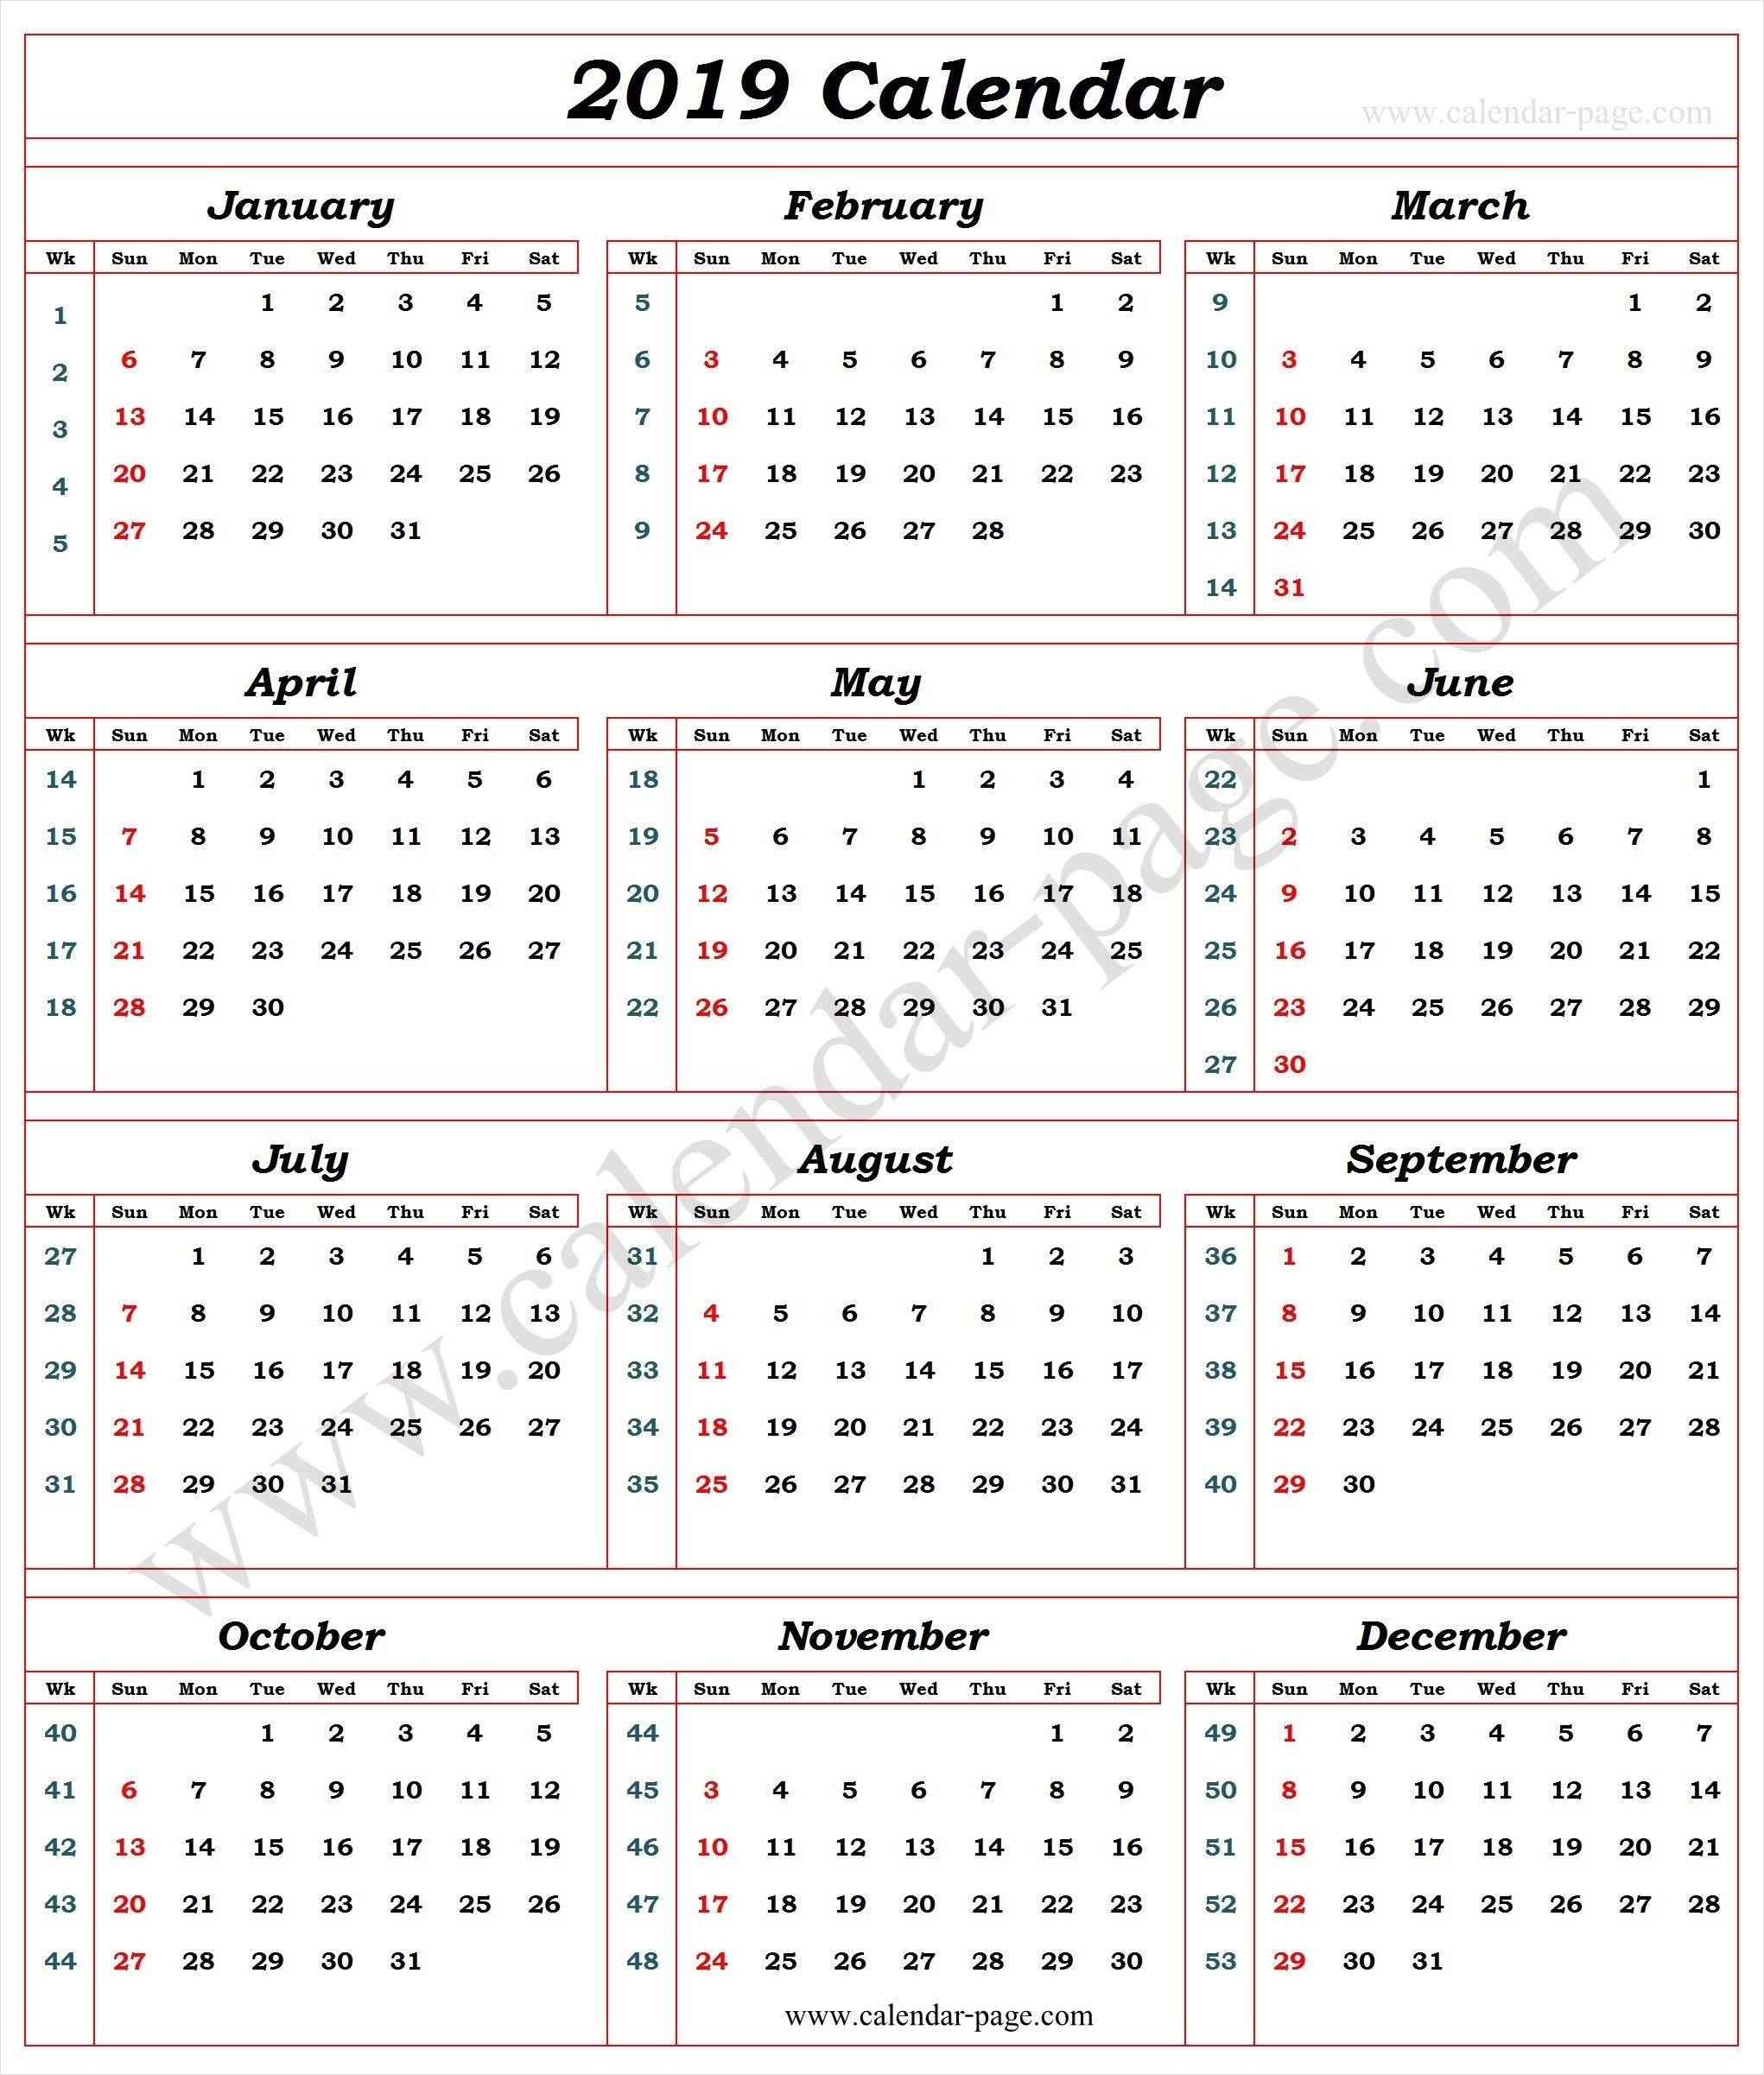 Calendar 2019 With Week Numbers | Calendar With Week Numbers  Free Lectionary Calendar For 2021 Jan To Dec